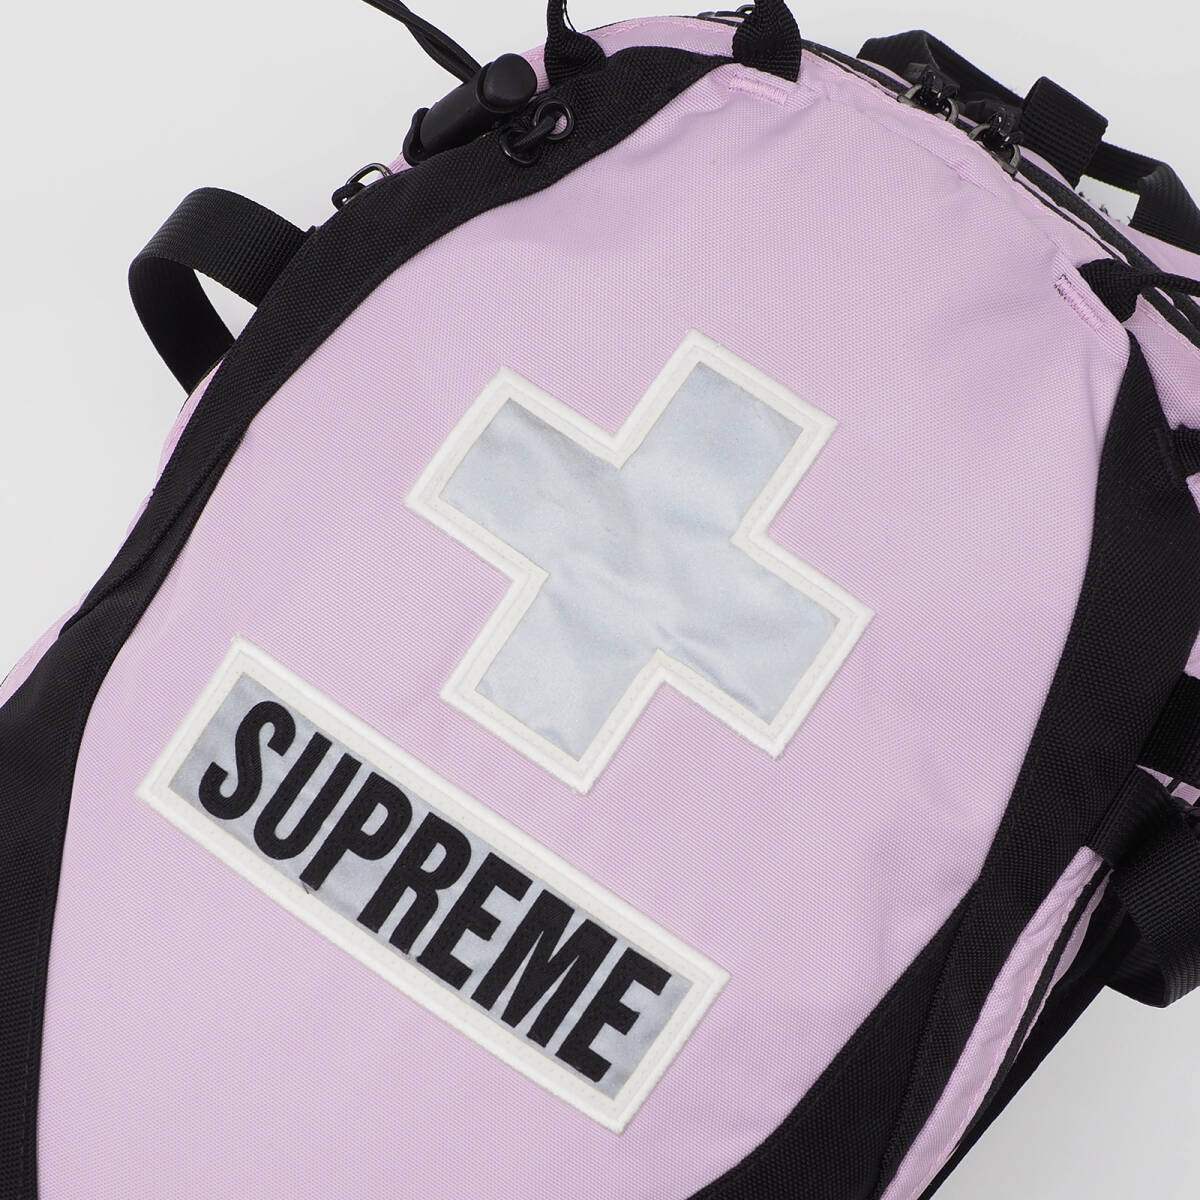 Supreme/The North Face Summit Series Rescue Chugach 16 Backpack 紫 ザ ノース フェイス サミット シリーズ レスキュー チュガッチ 16_画像3